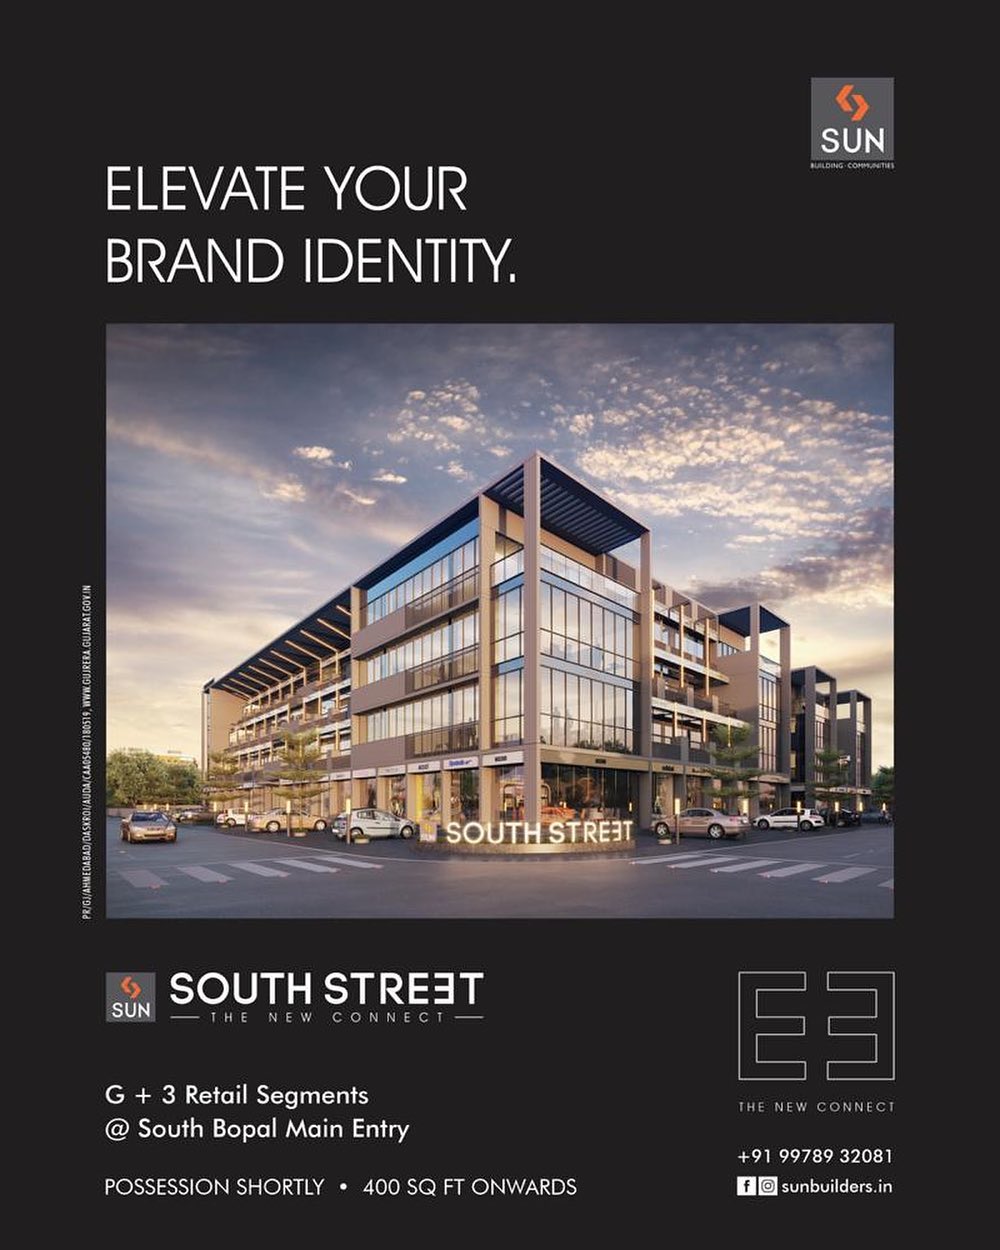 Sun South Street is designed for today’s retail needs looking at the opportunity of the captive audience at SOBO.

For Details Call: +91 99789 32081

#SunSouthStreet #Ahmedabad #SunBuildersGroup #Gujarat #RealEstate #Commercial #Retail #SunBuilders #SouthBopal #SOBO